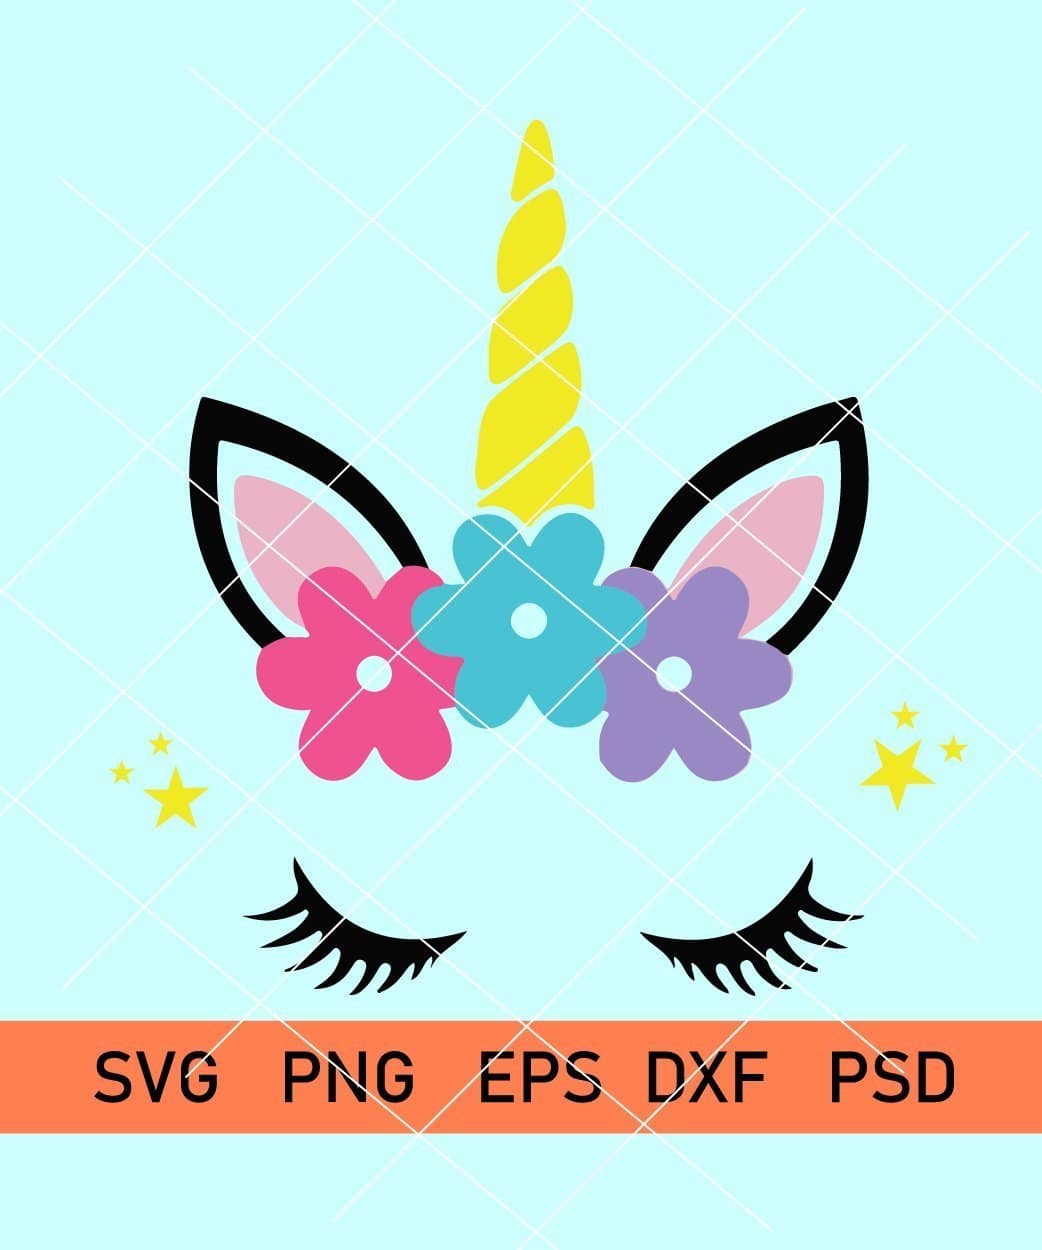 Unicorn Head Svg Unicorn Face Svg Unicorn Svg Unicorn With Flowers